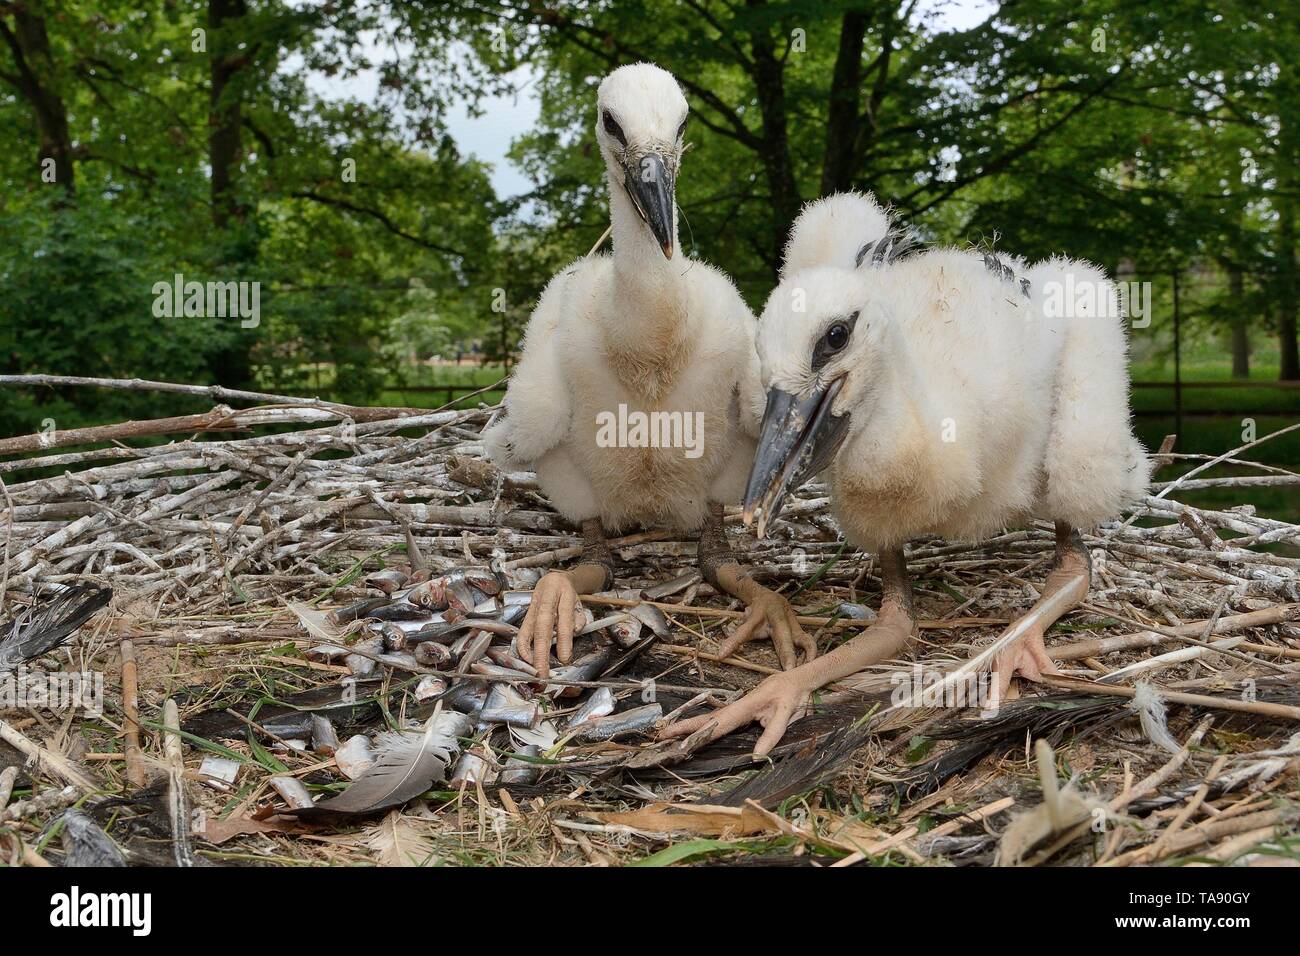 White stork (Ciconia ciconia) chicks in a captive breeding colony supplying UK White Stork reintroductions, Cotswold Wildlife Park. Stock Photo